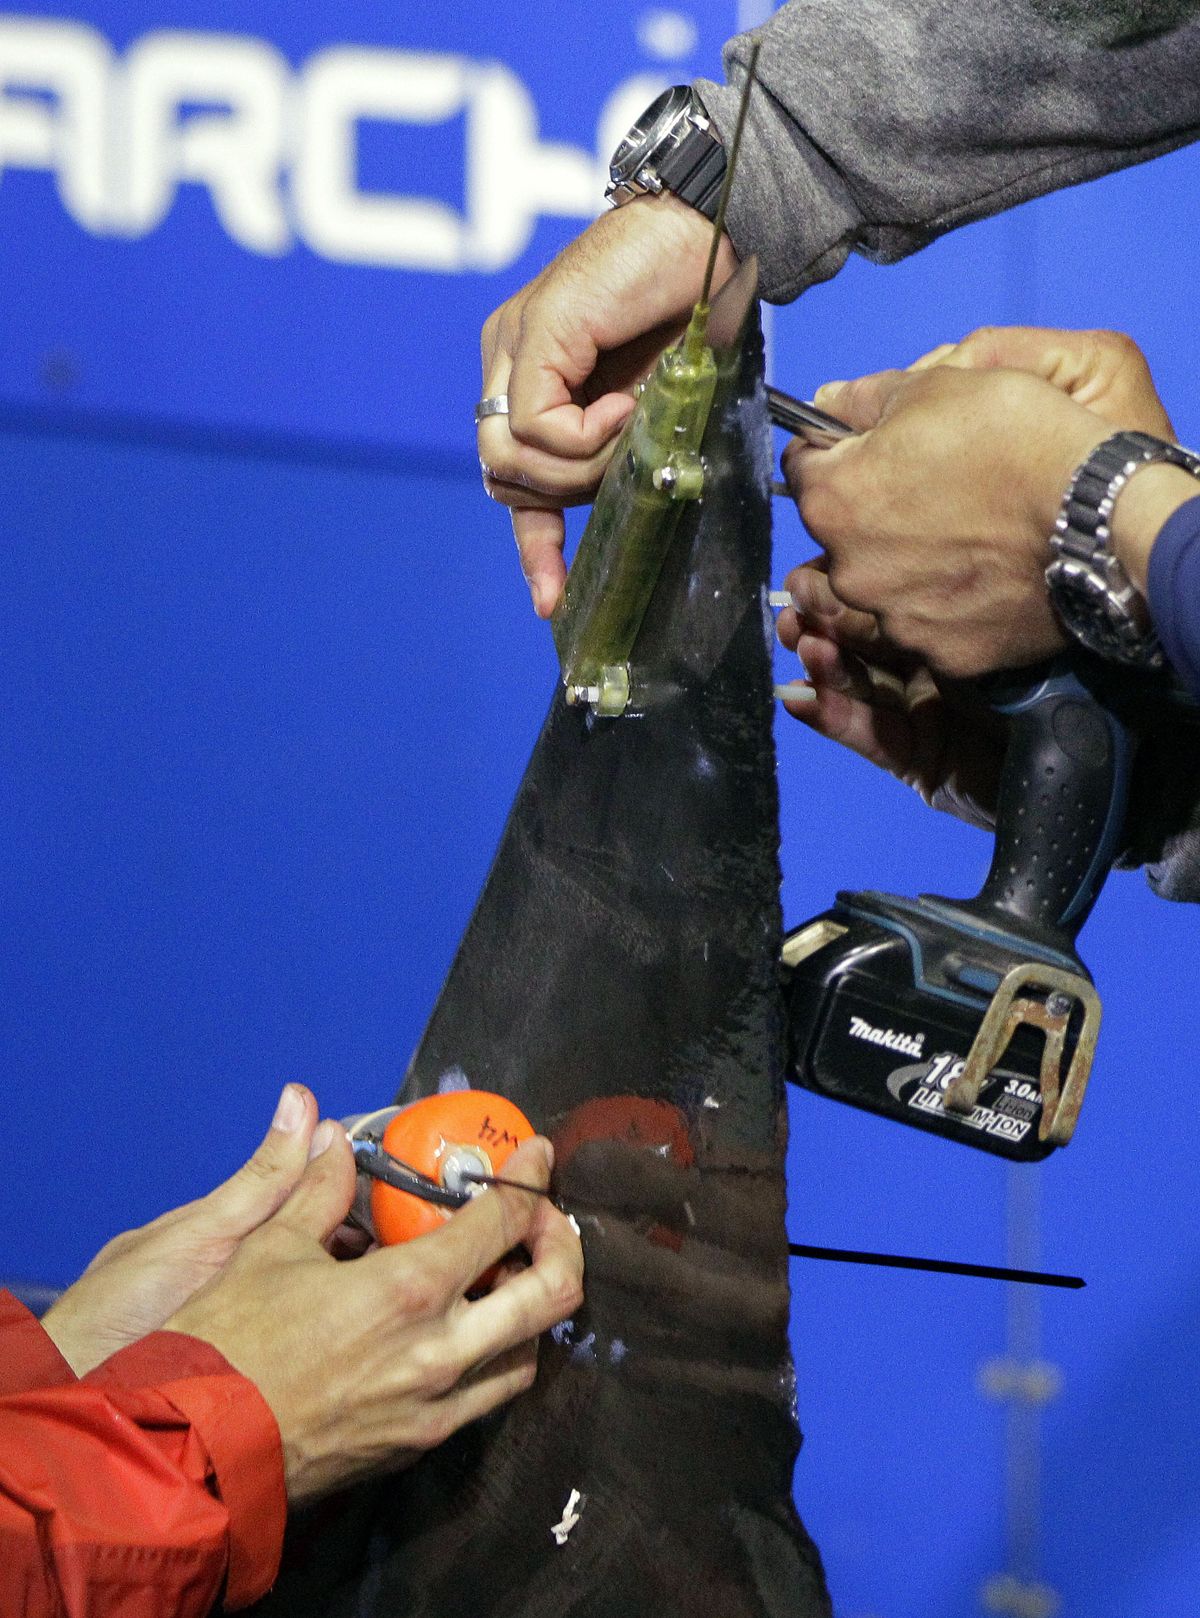 In this Sept. 13, 2012, photo, researchers screw satellite and acoustic tags onto the dorsal fin of a great white shark on the research vessel Ocearch in the Atlantic Ocean off the coast of Chatham, Mass. Once released, the tags will track the location and speed of the nearly 15-foot, 2,292-pound Genie, named for famed shark researcher Eugenie Clark. The Ocearch team baits the fish and leads them onto a lift, tagging and taking blood, tissue and semen samples up close from the world�s most feared predator. The real-time satellite tag tracks the shark each time its dorsal fin breaks the surface, plotting its location on a map. (Stephan Savoia / Associated Press)